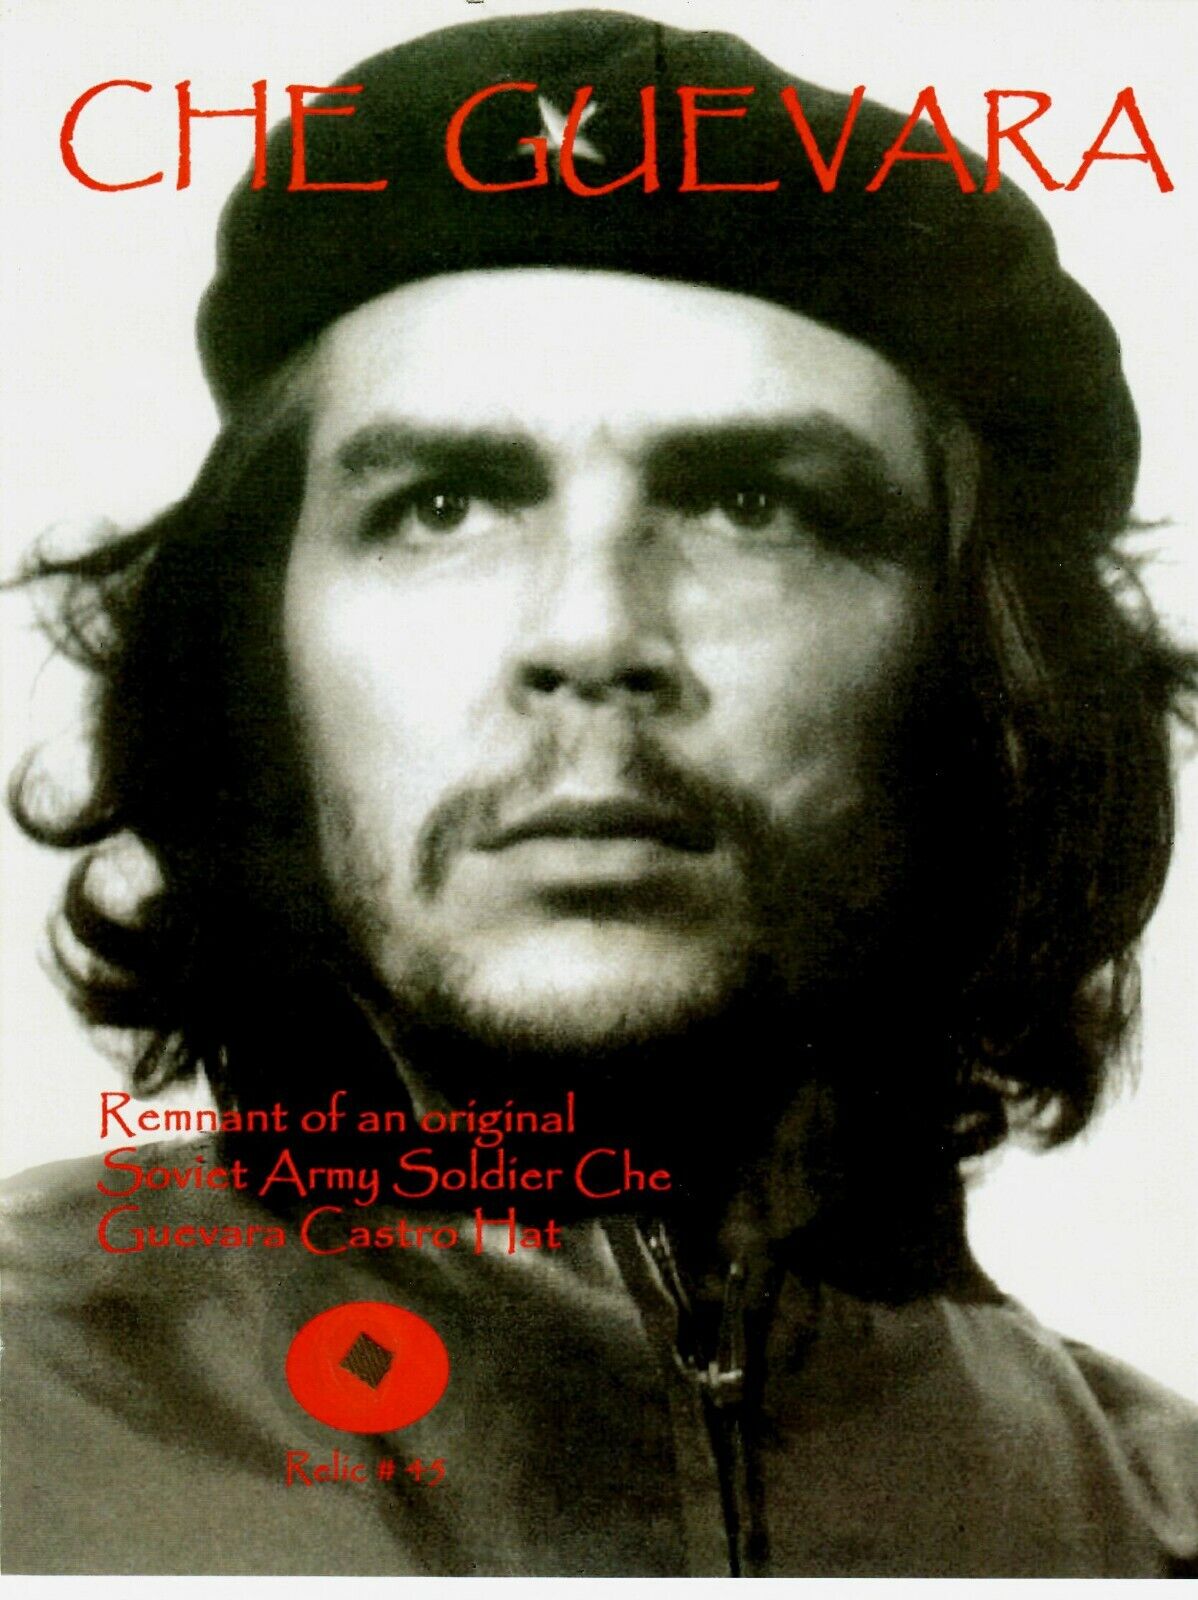 RARE “Che Guevara” Remnant of a Soviet Army Soldier Hat COA